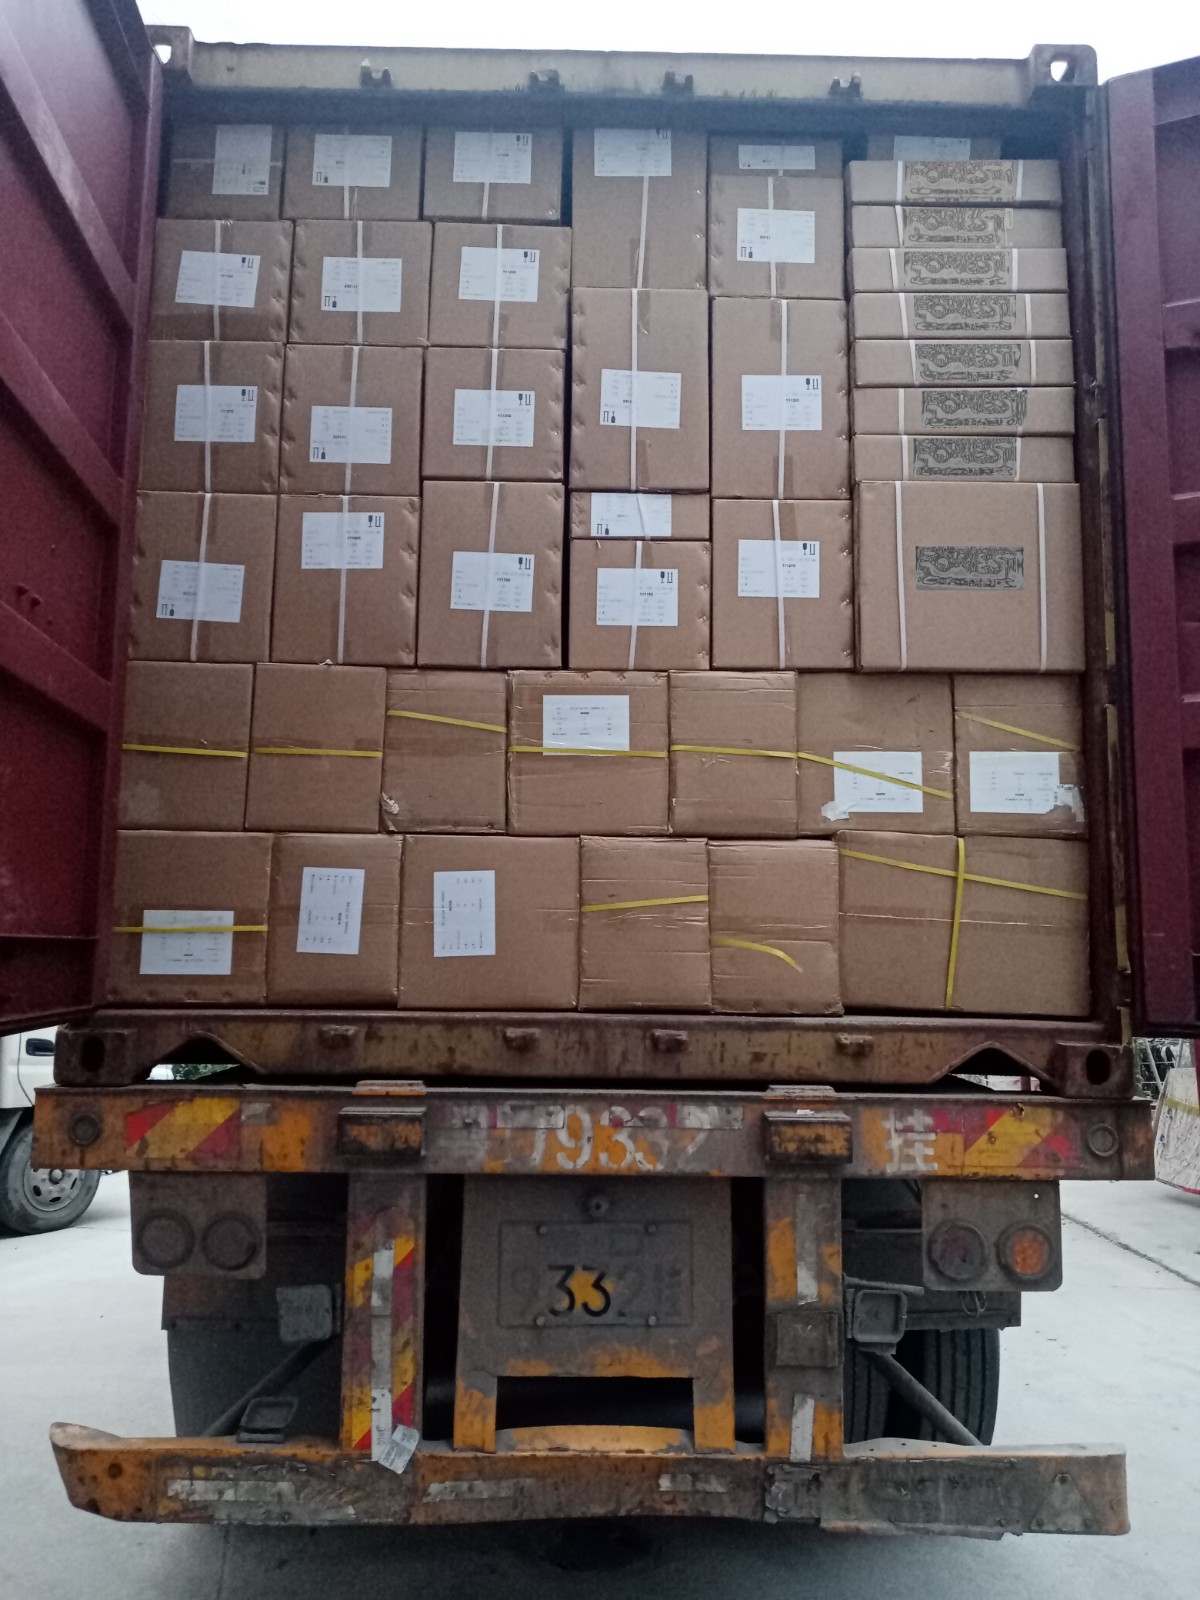 20 GP Container of GN Pans and Baking pans was Sent to Ukraine on December 18th